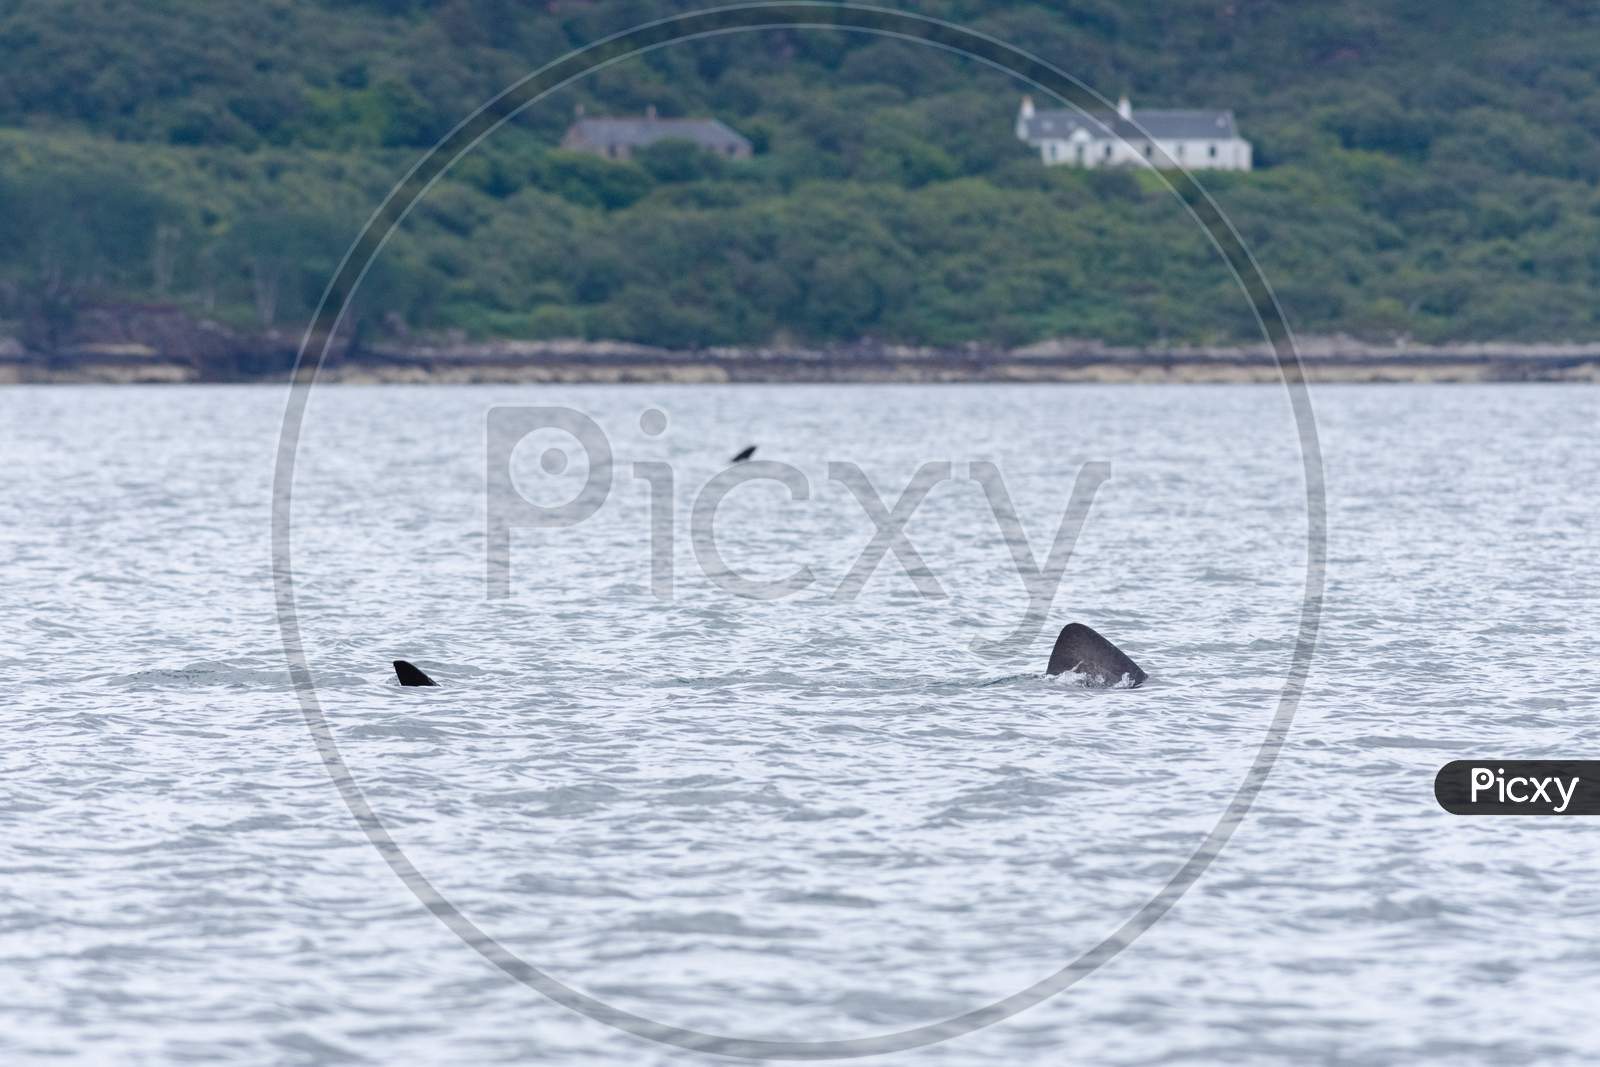 Two Basking Sharks Cross Paths Small Island Homes In The Background.